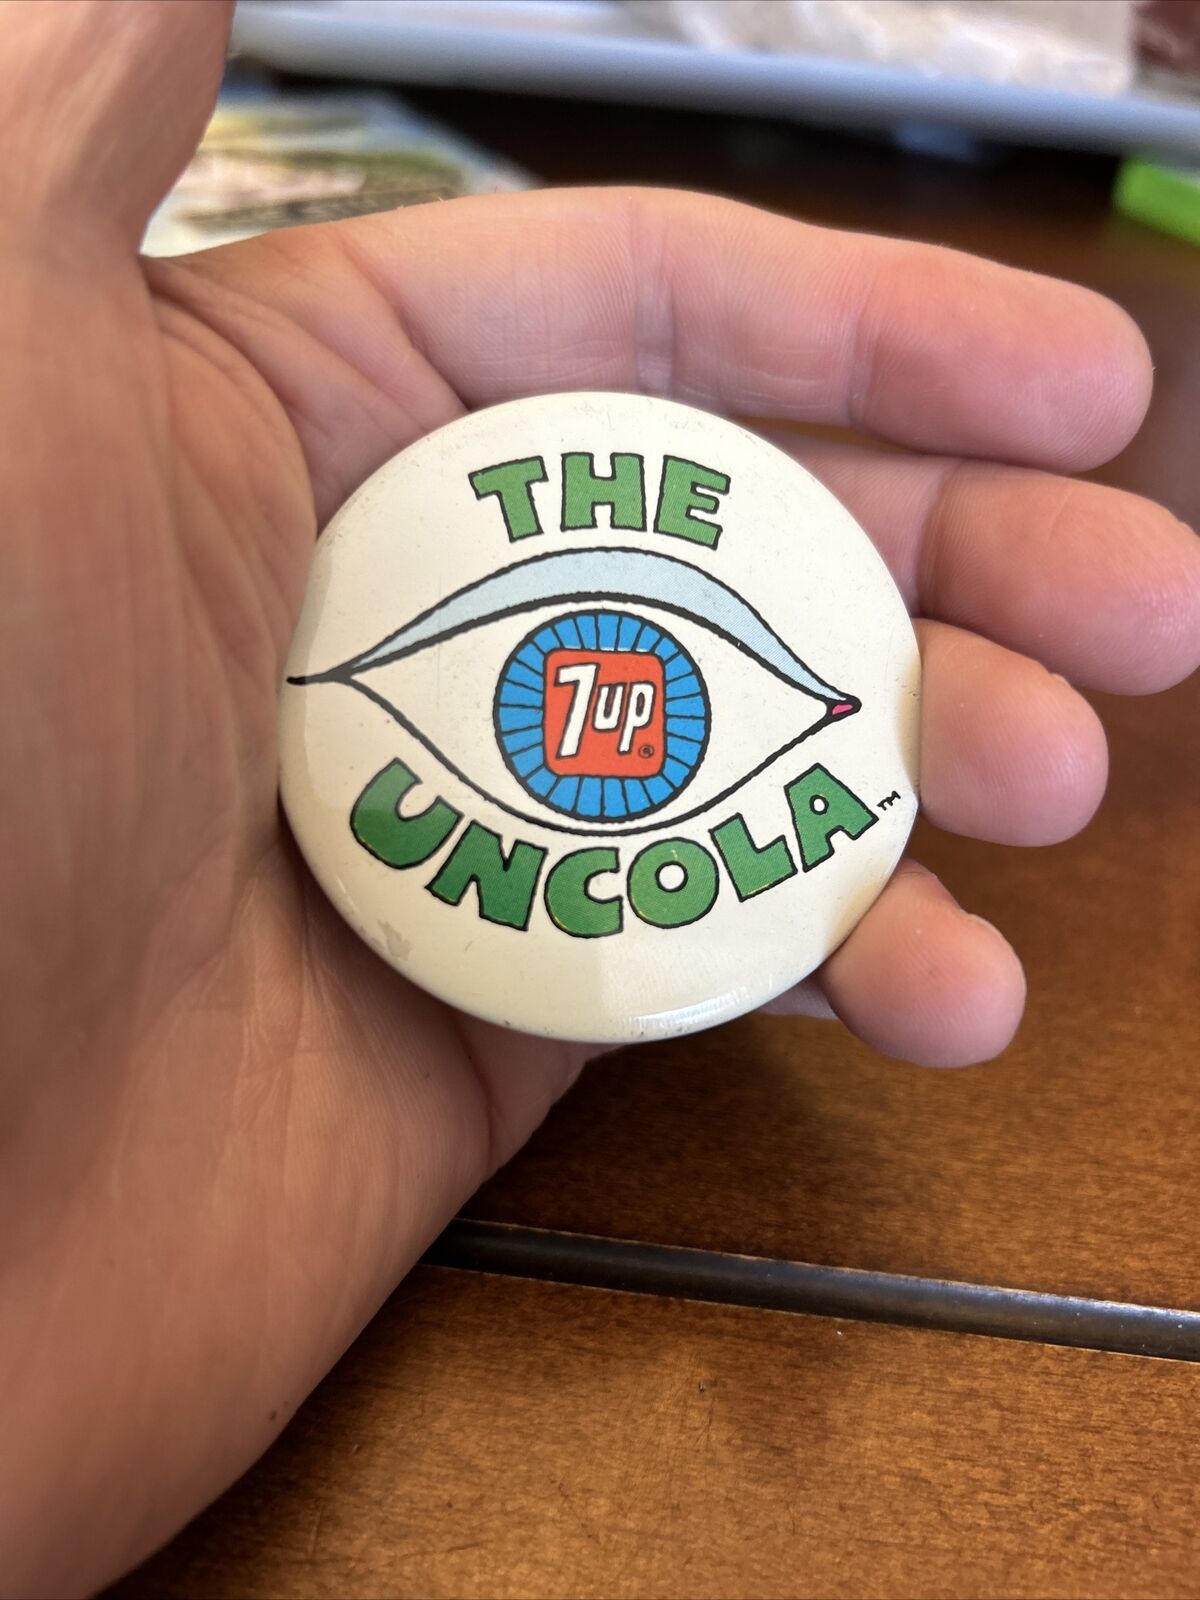 C 1968 Introduction Of 7-Up, The Uncola Button Pinback Famous Branding Campaign